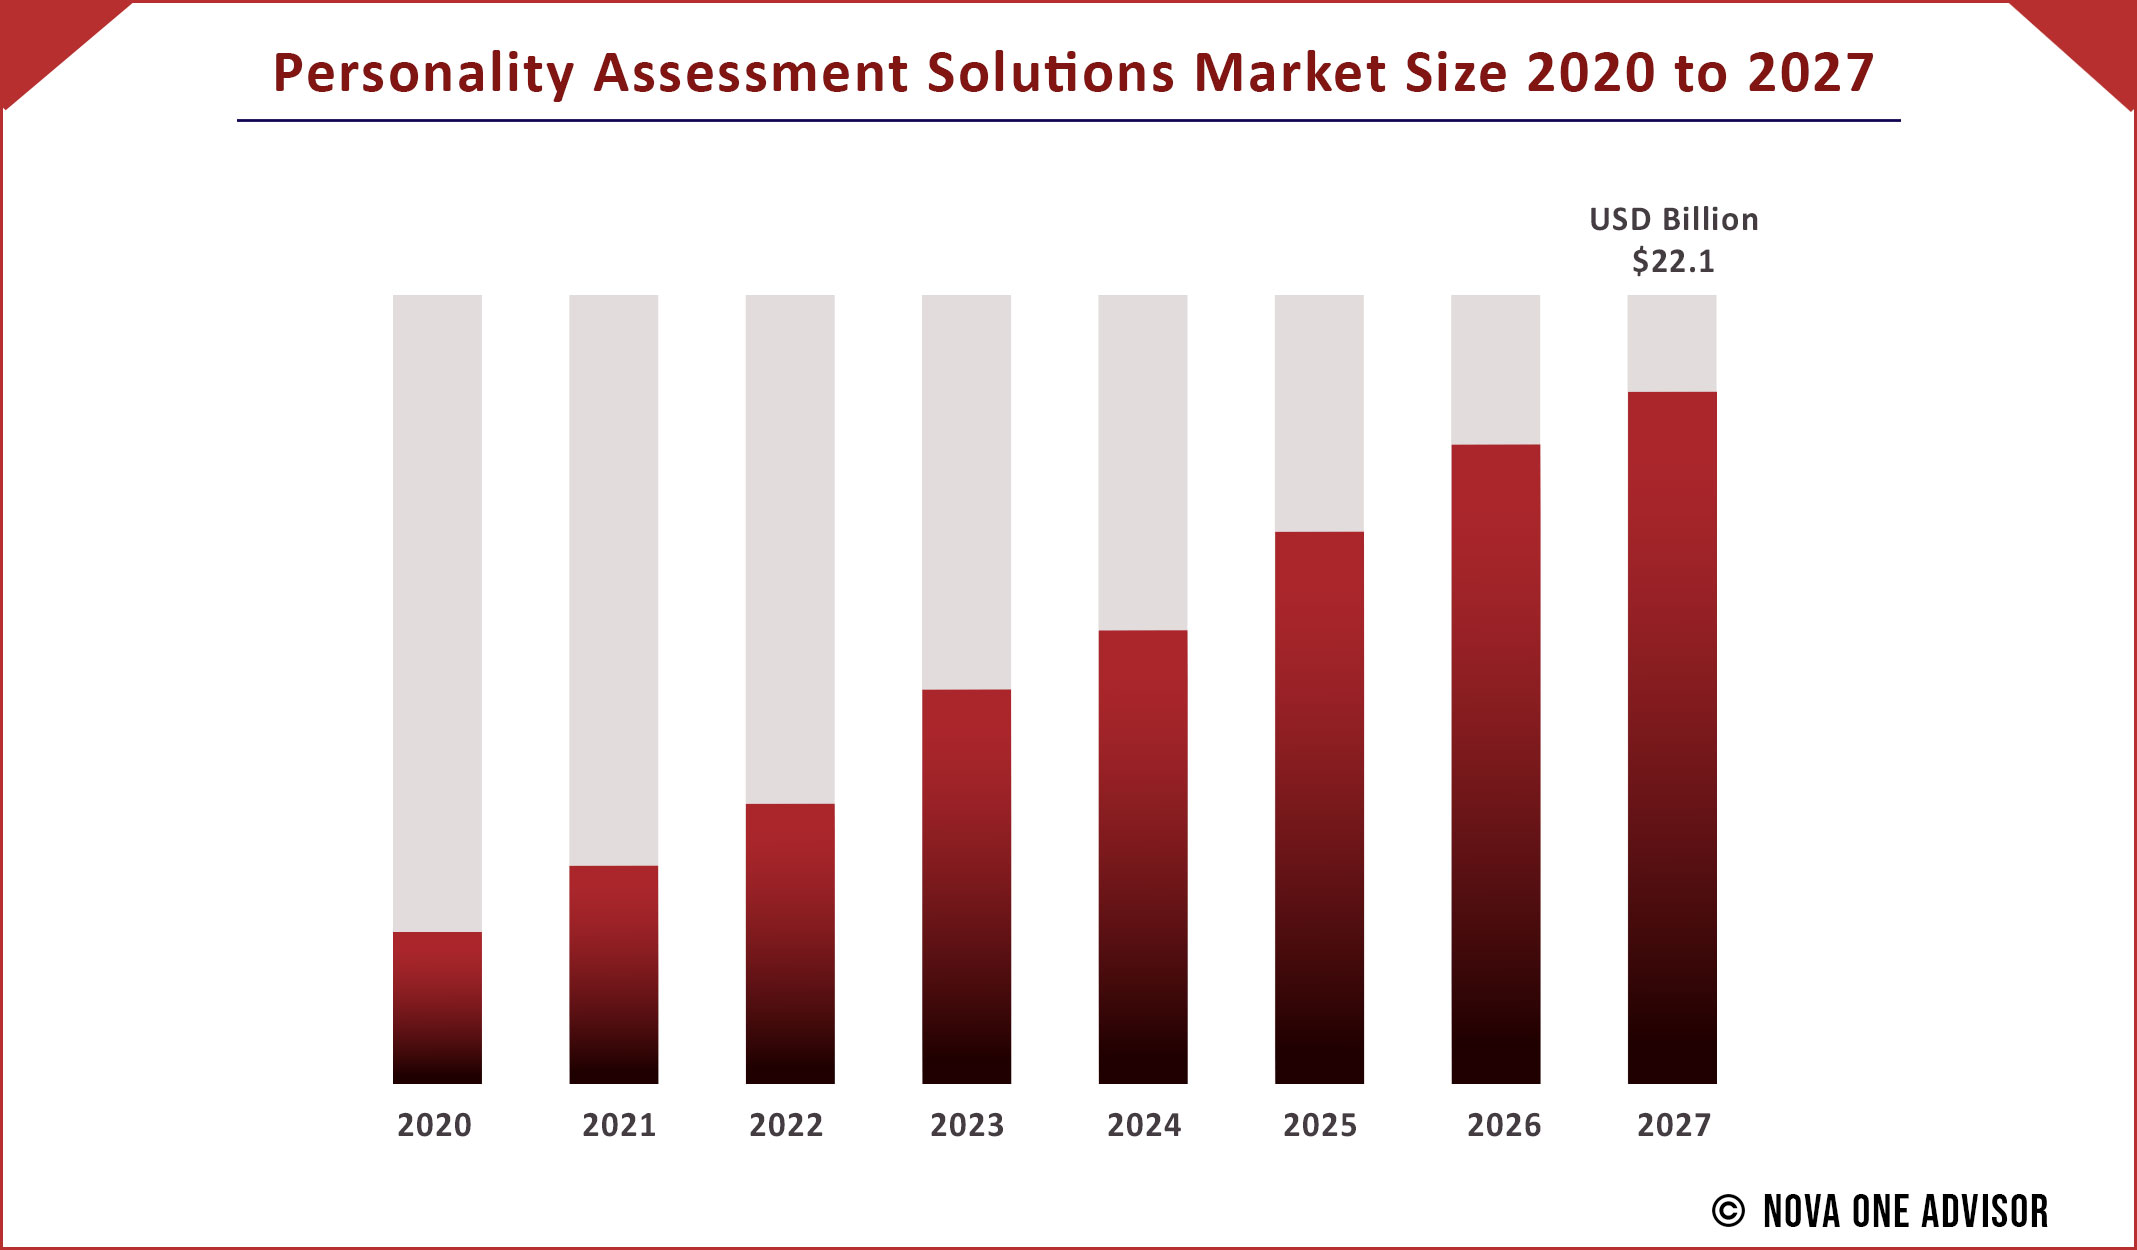 Personality Assessment Solutions Market Size 2020 to 2027